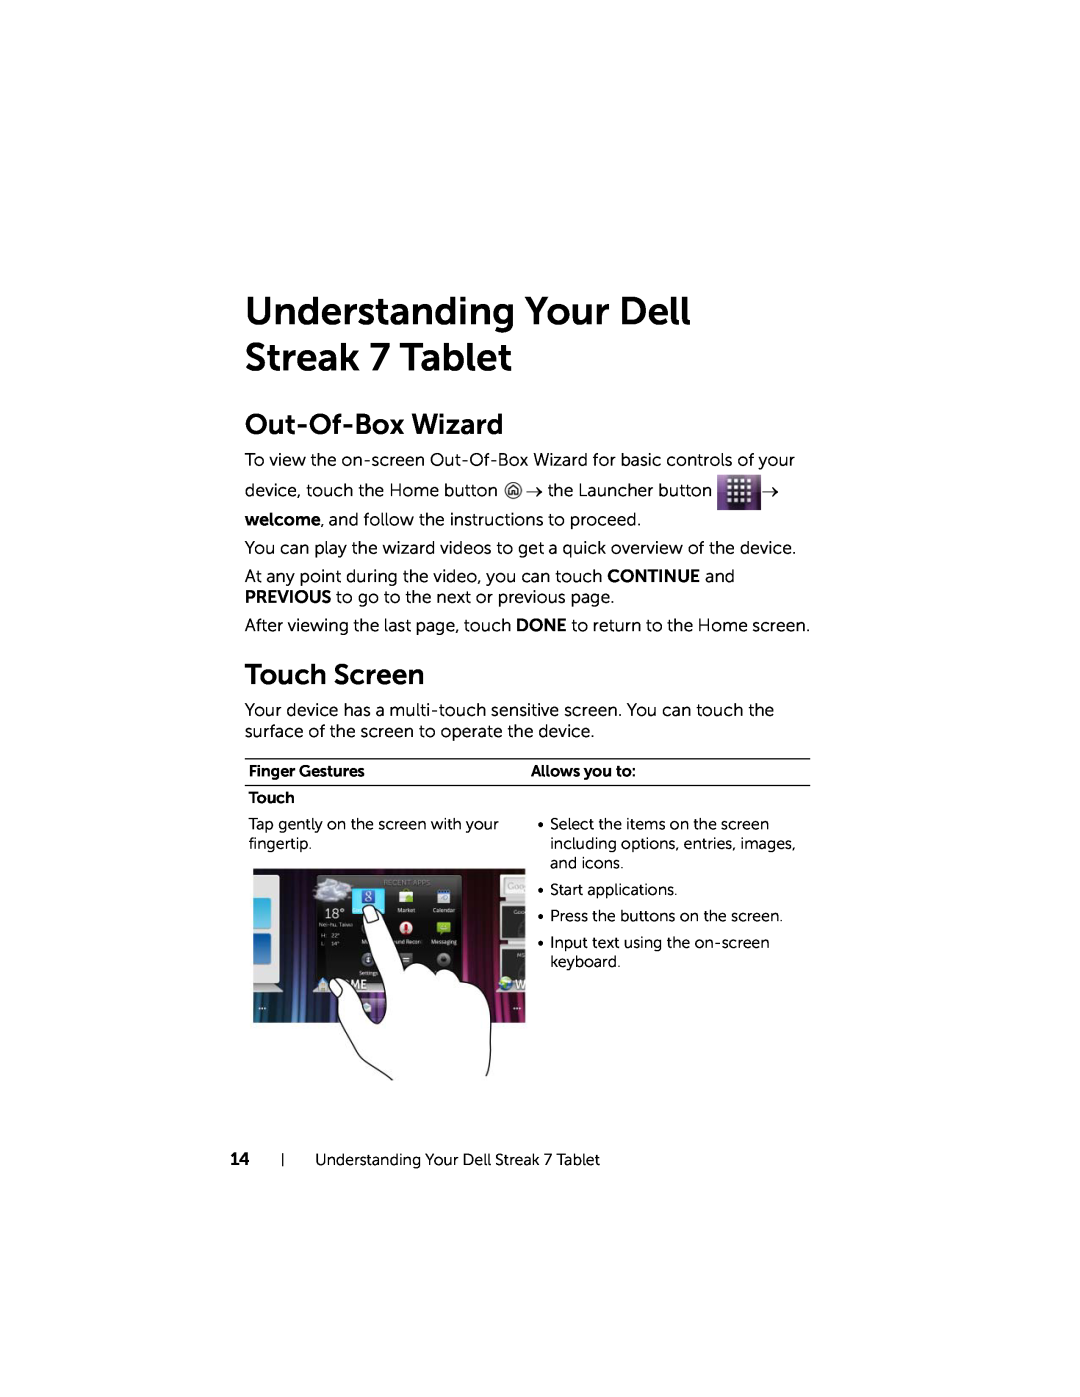 Dell user manual Understanding Your Dell Streak 7 Tablet, Out-Of-Box Wizard, Touch Screen 